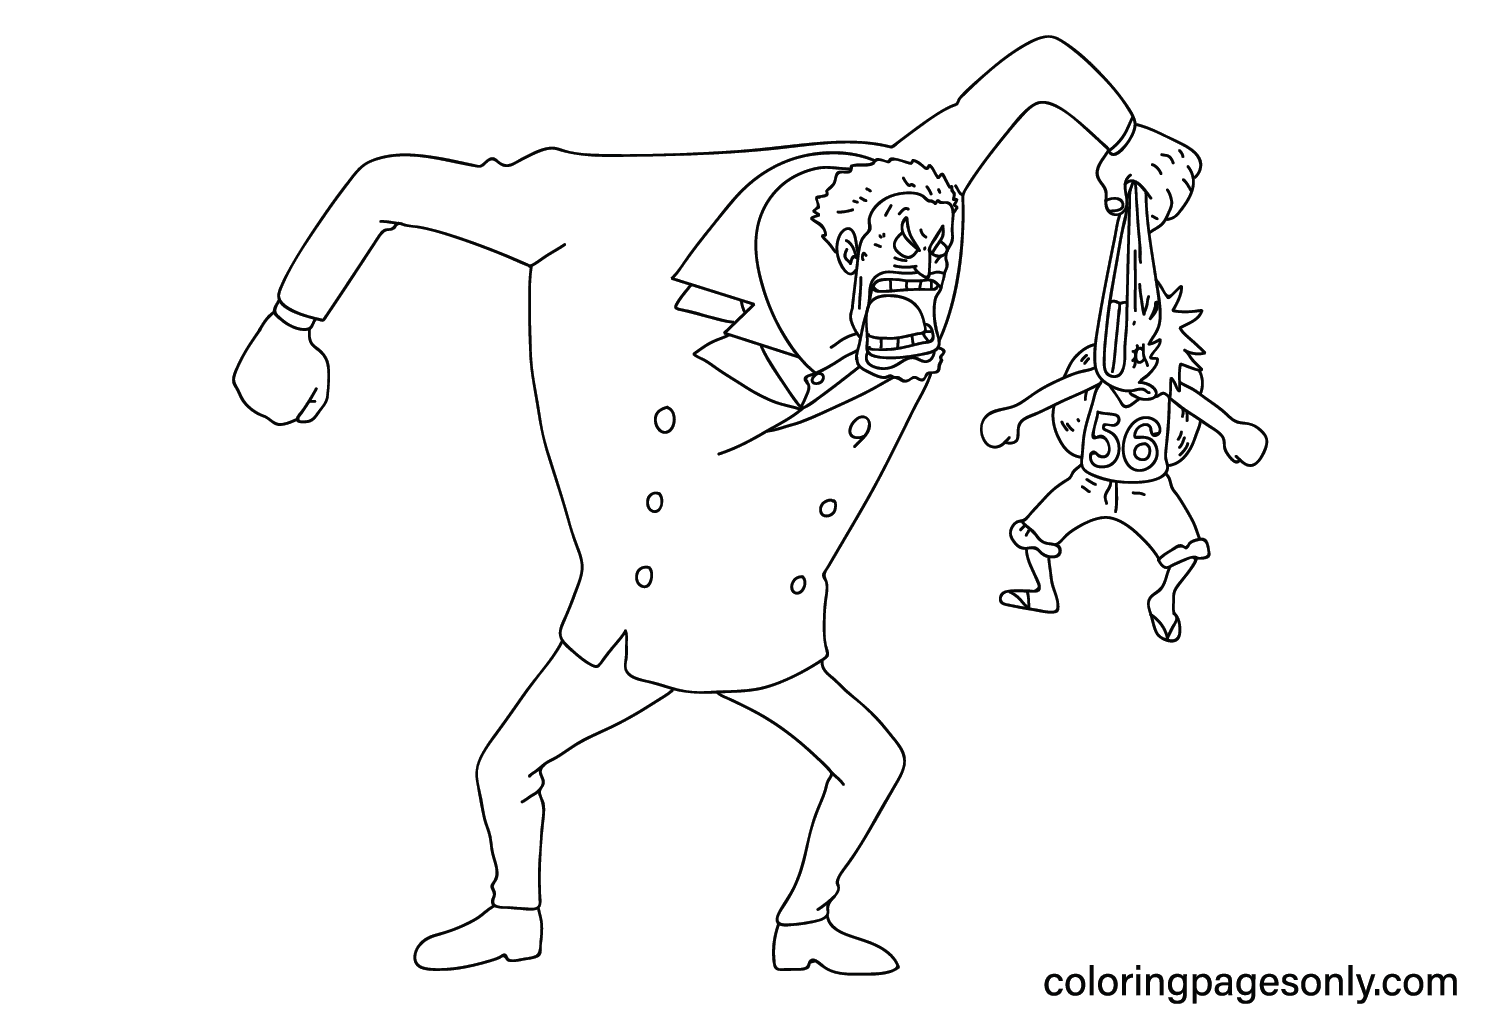 Monkey D. Garp, Luffy Coloring Pages to Printable from Luffy